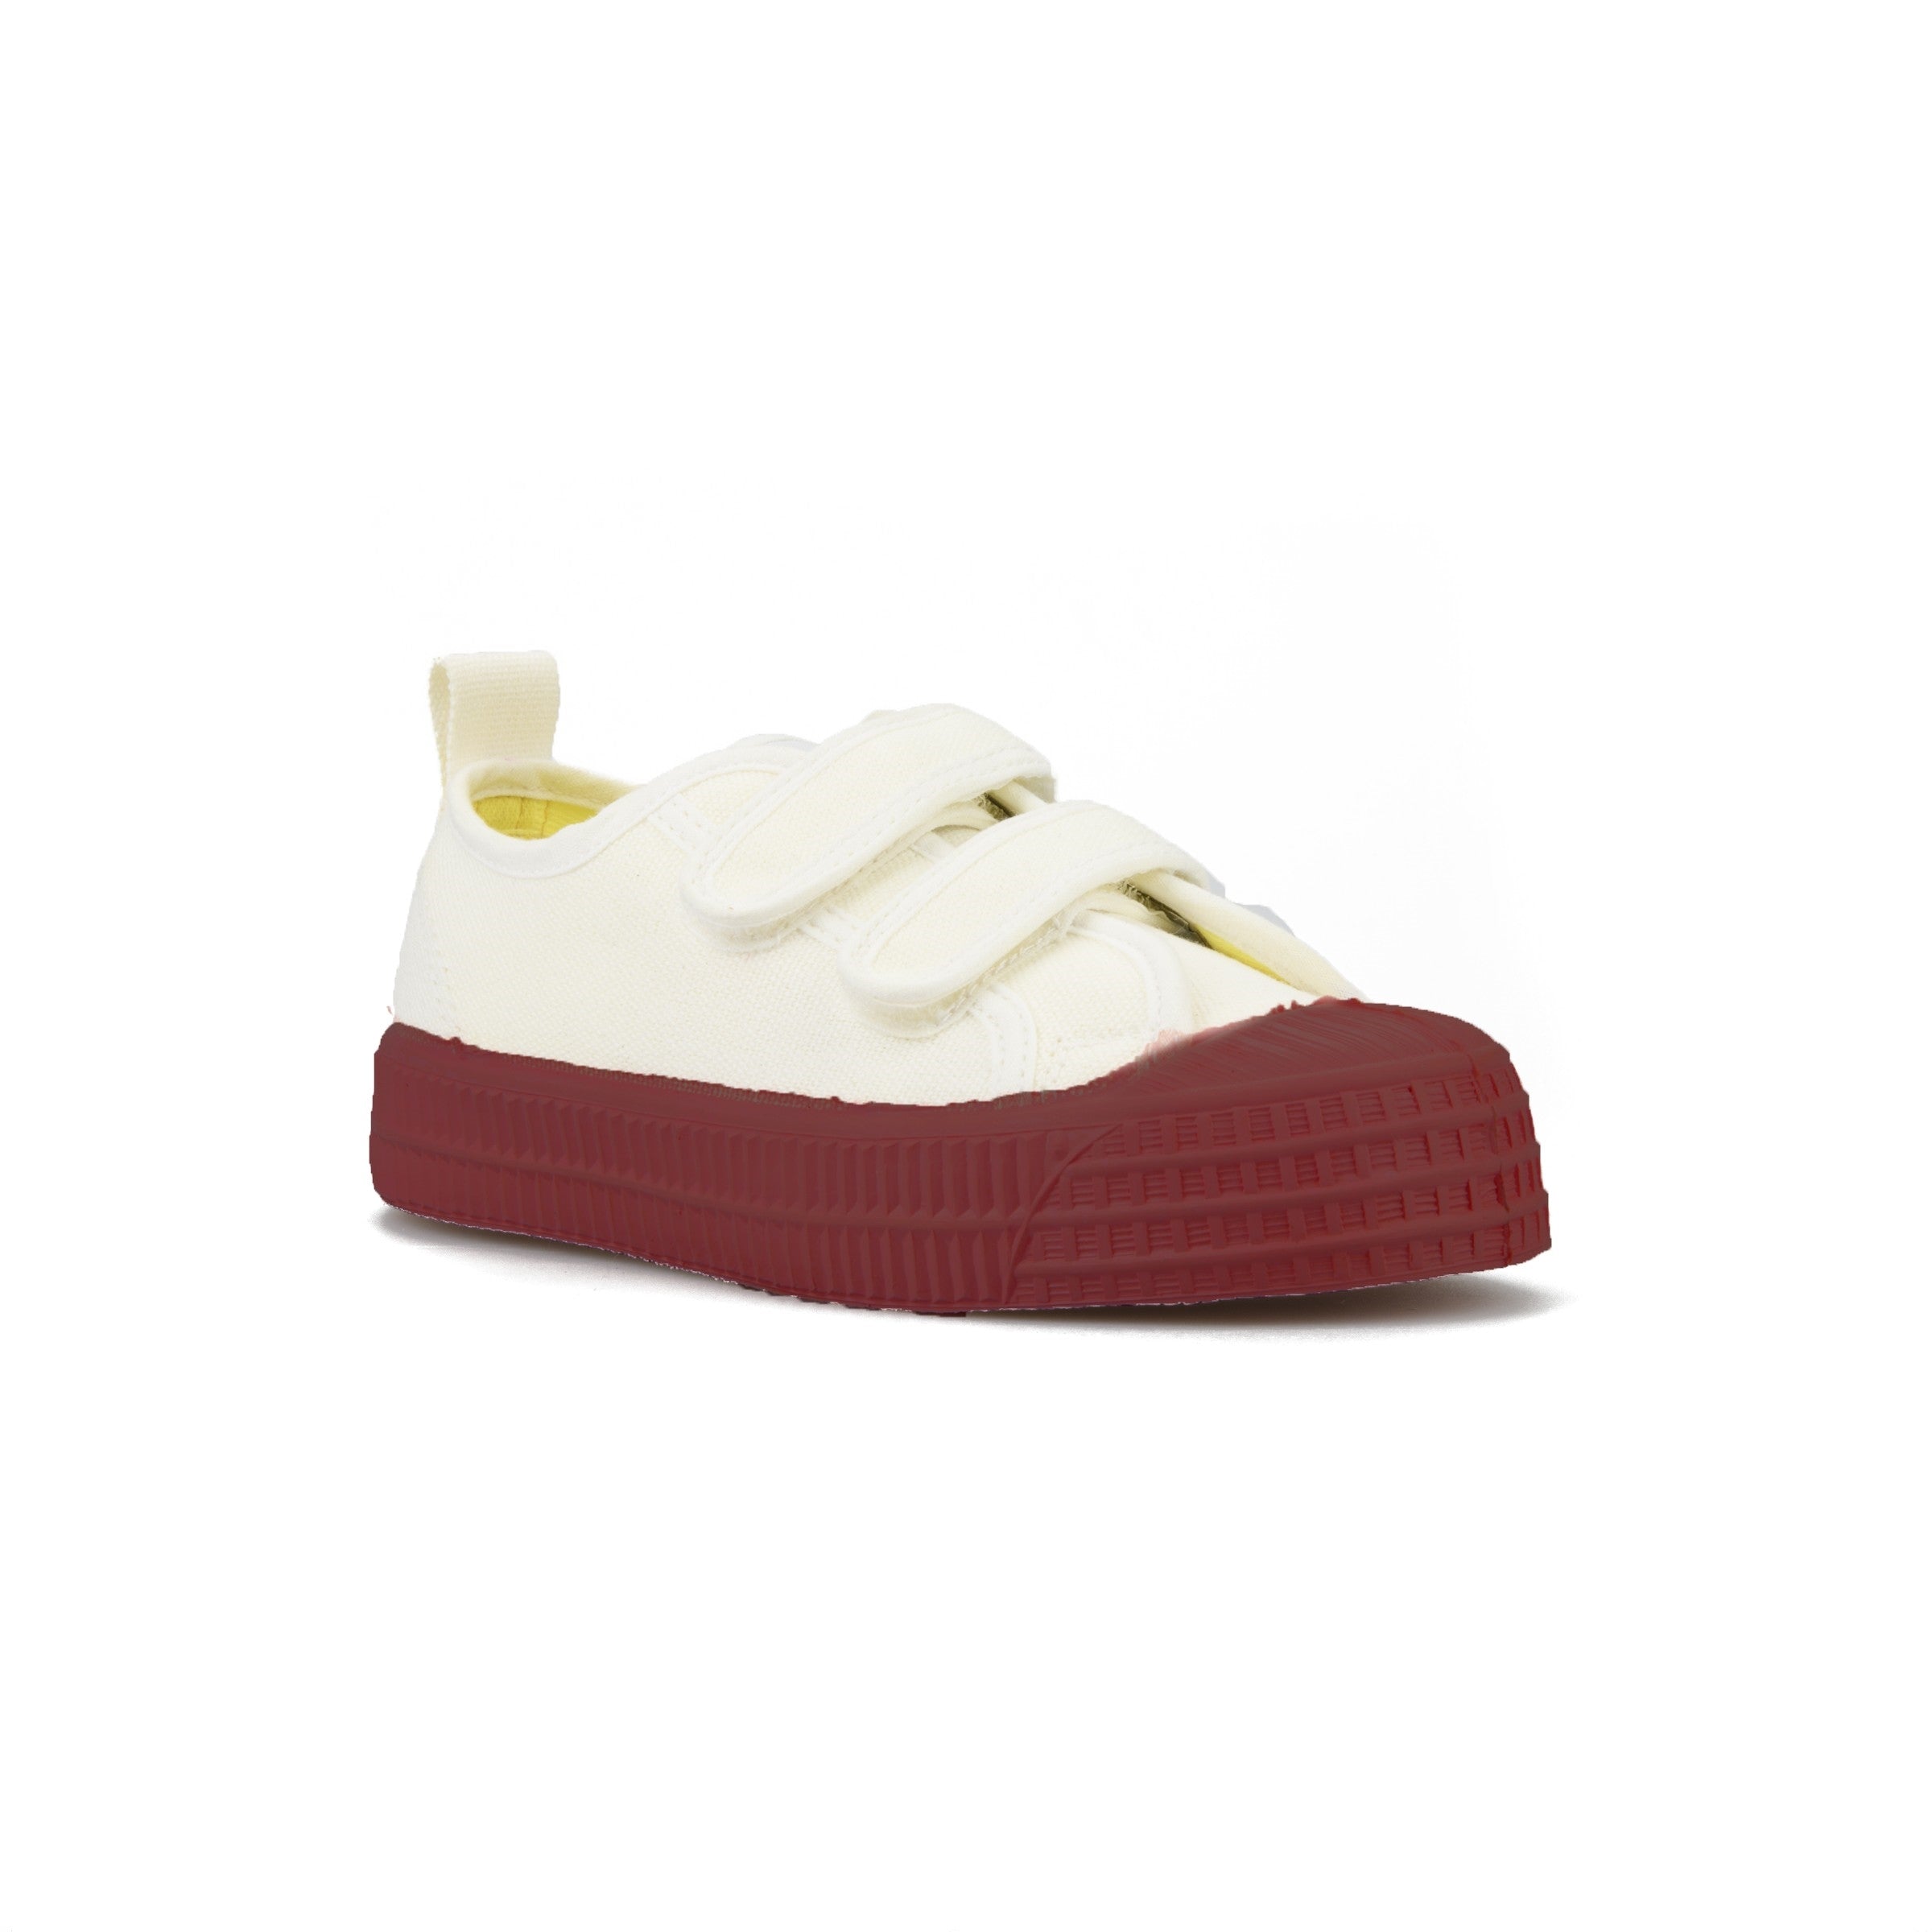 Girls White & Red Velcro Shoes